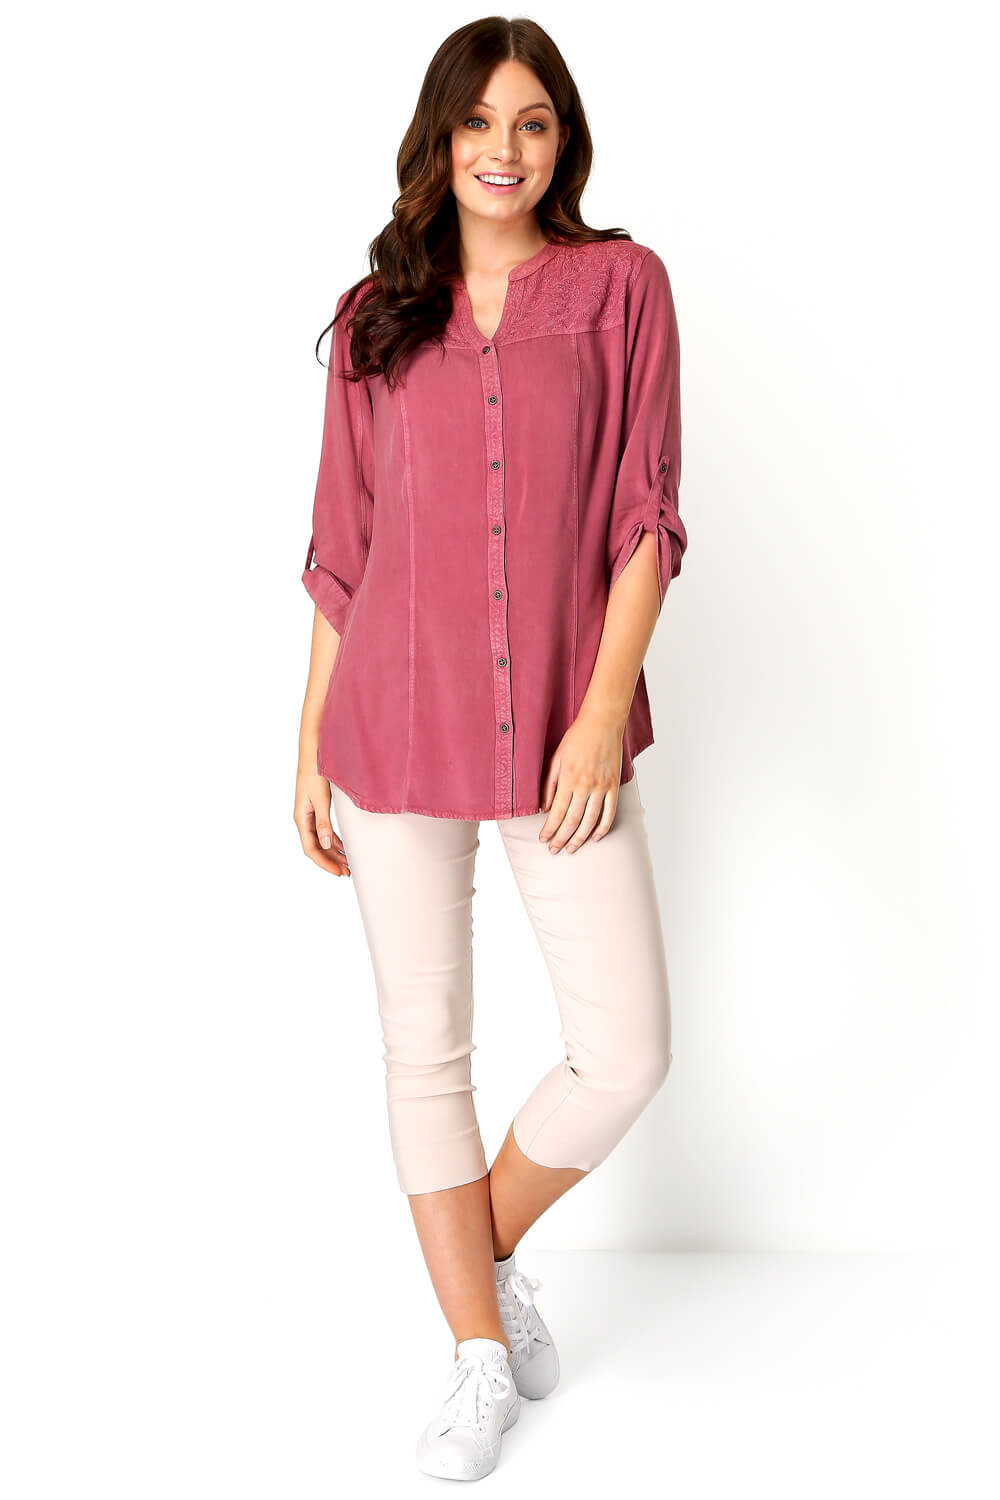 PINK Embroidered Button Through Blouse , Image 2 of 9